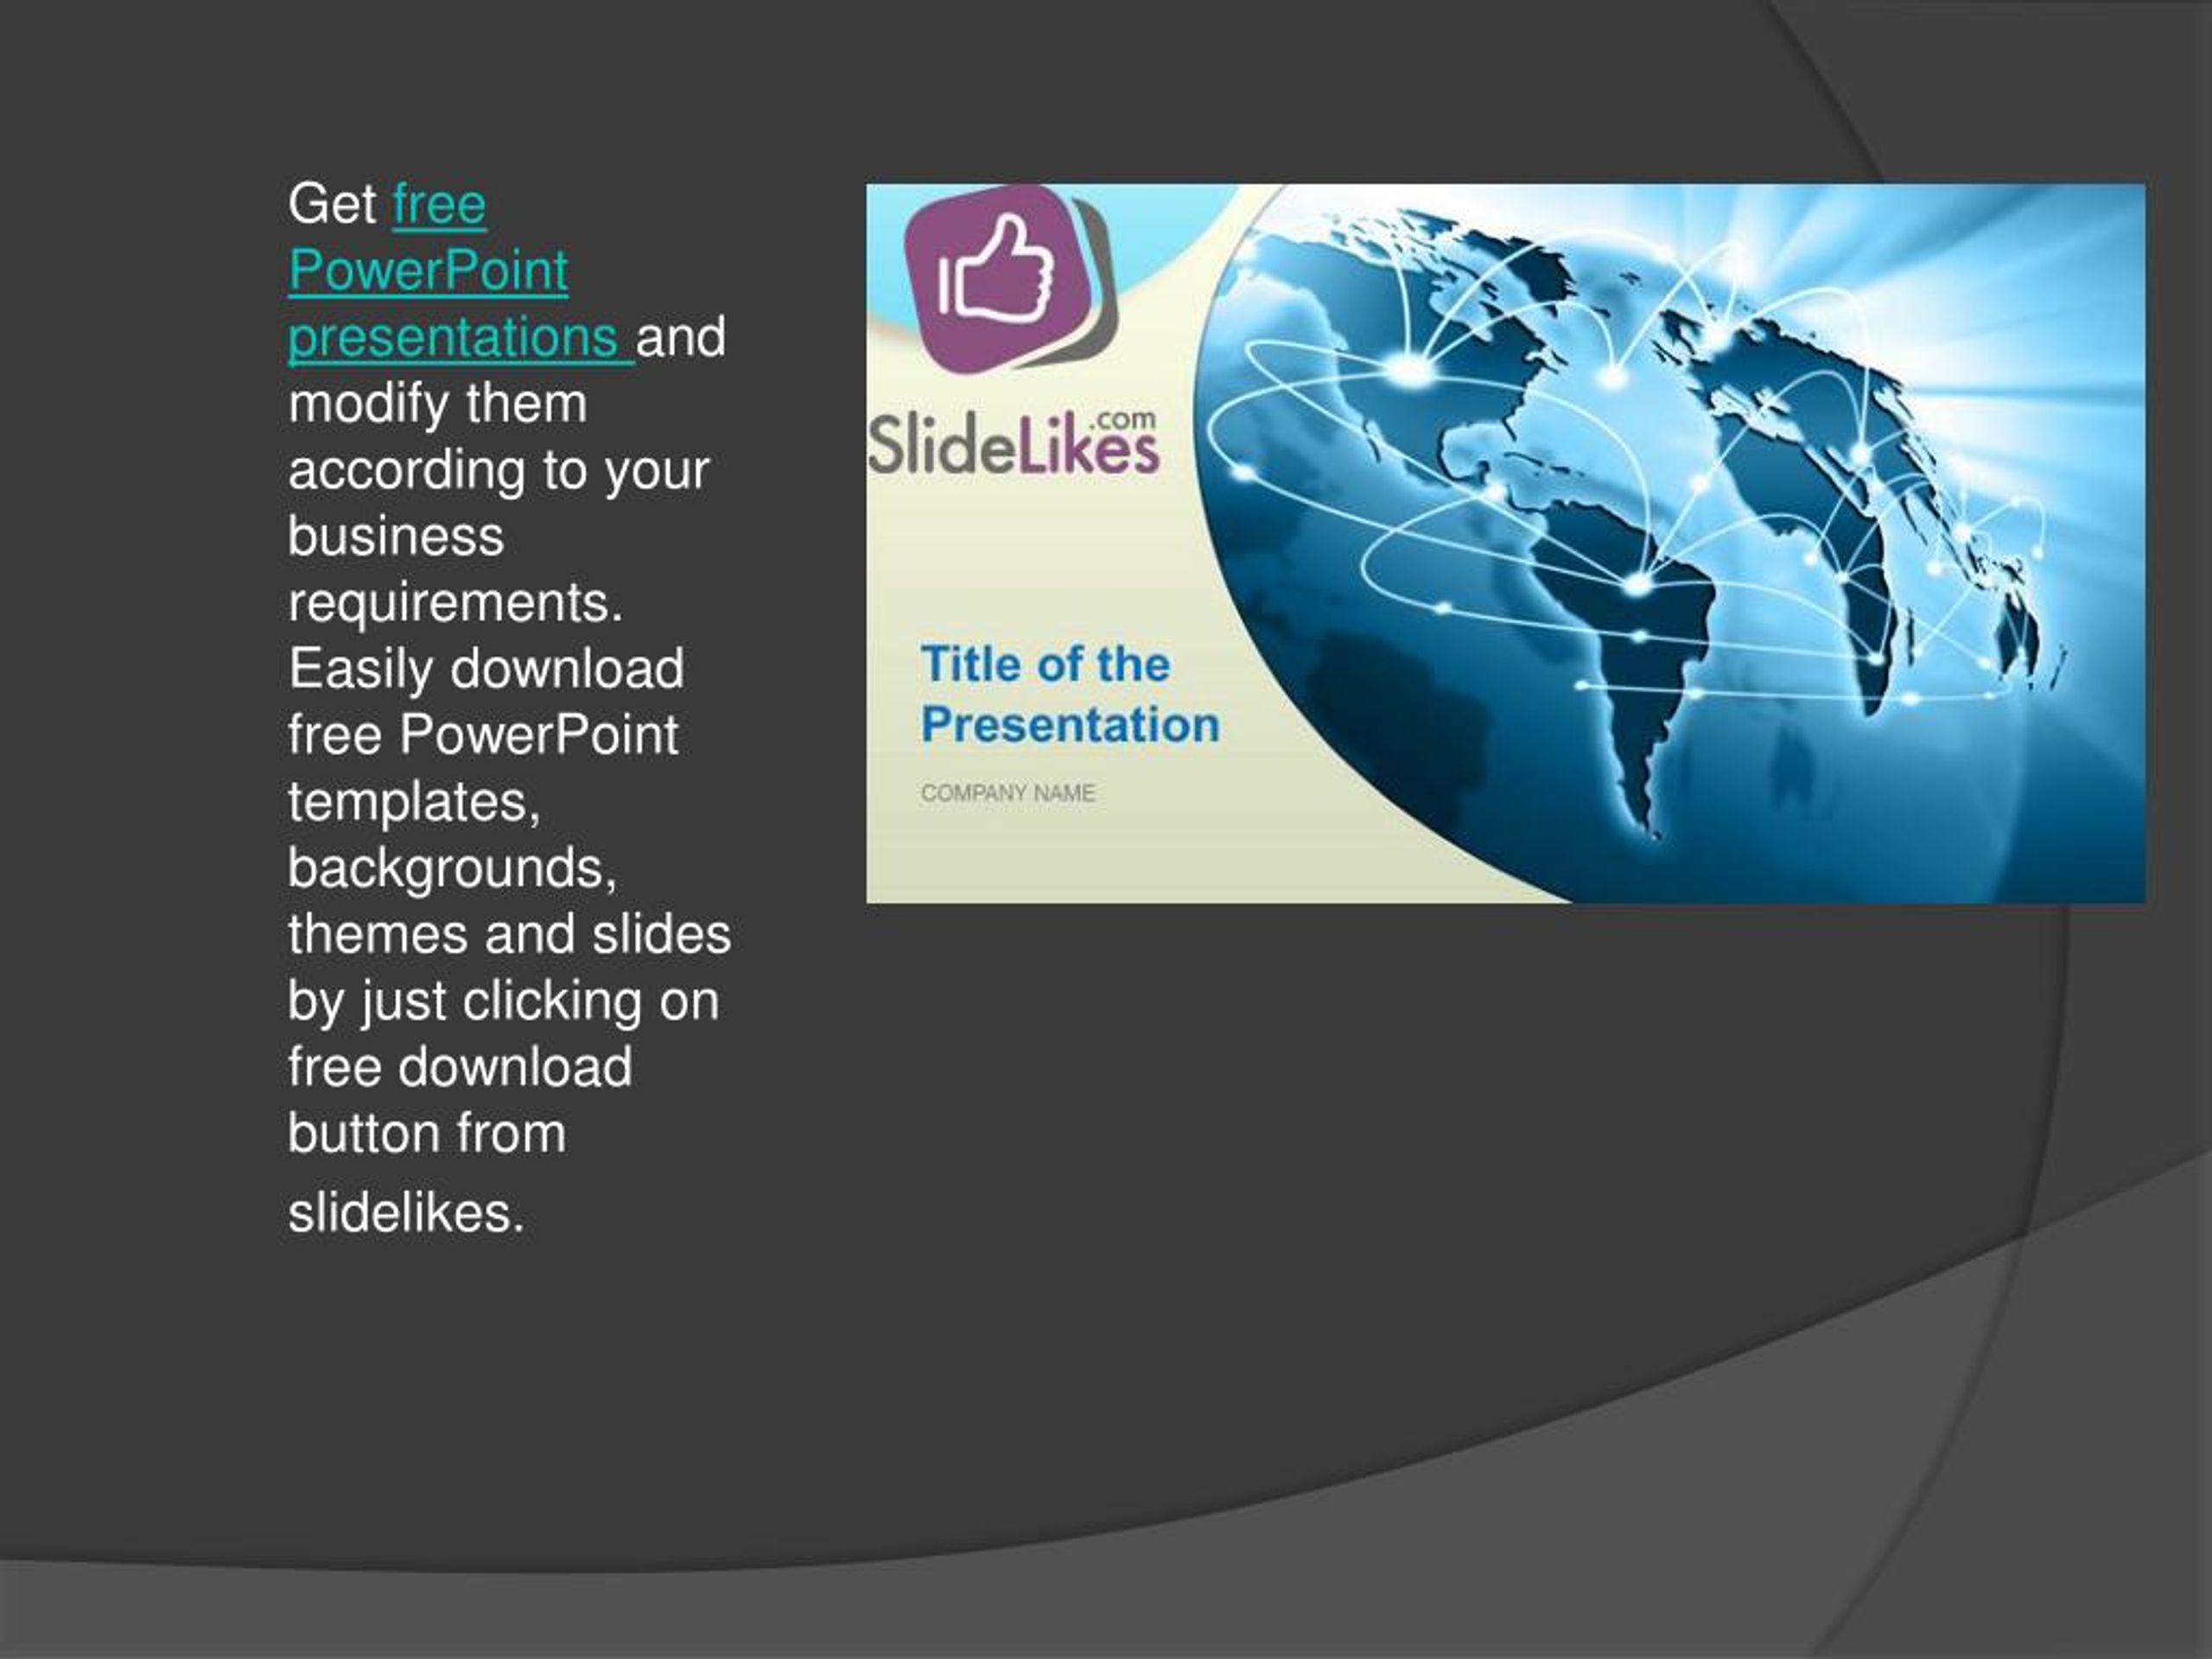 PPT - Download Free PowerPoint Templates PowerPoint Presentation, free